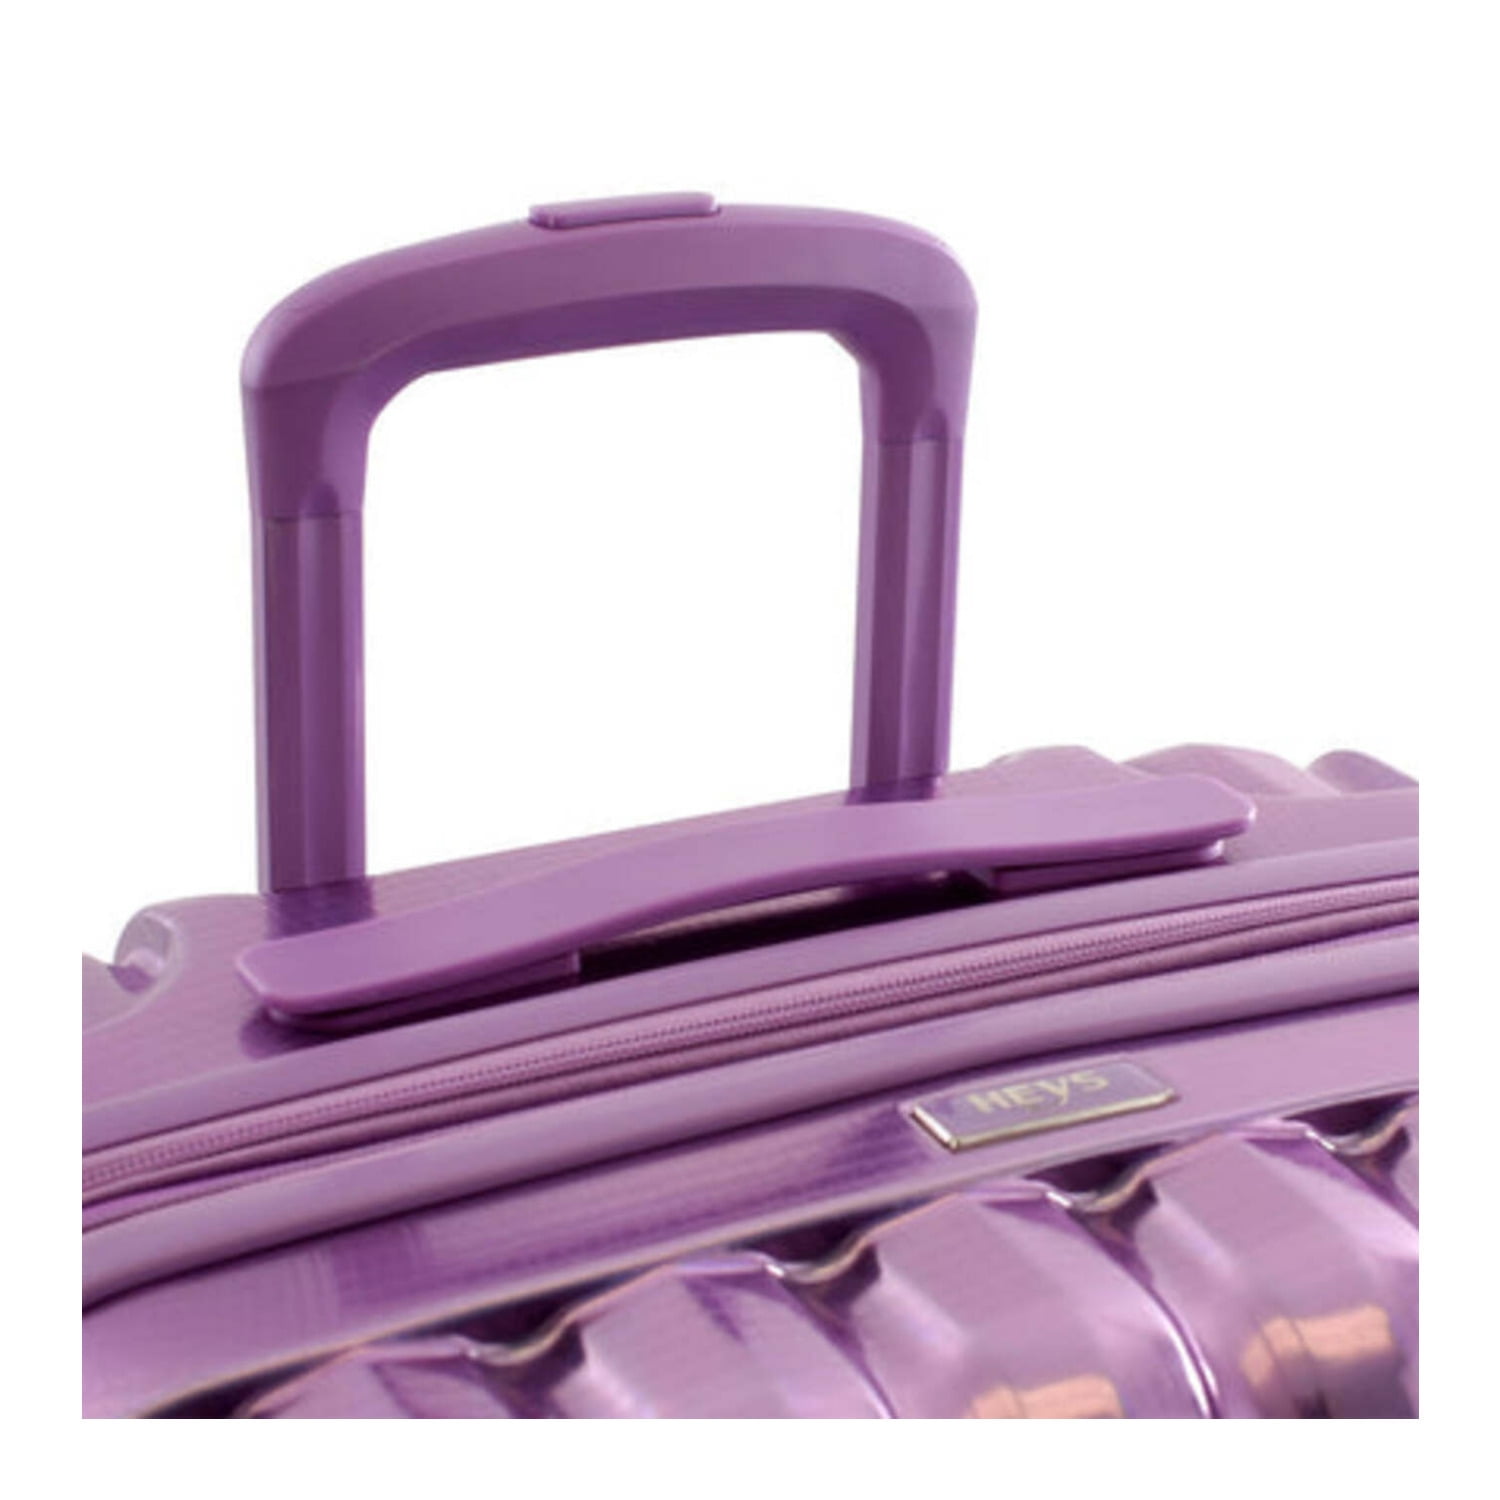 with Combination Lock Astro 21-Inch Luggage Bag Heys (Purple) TSA Lightweight Carry-On Built-In